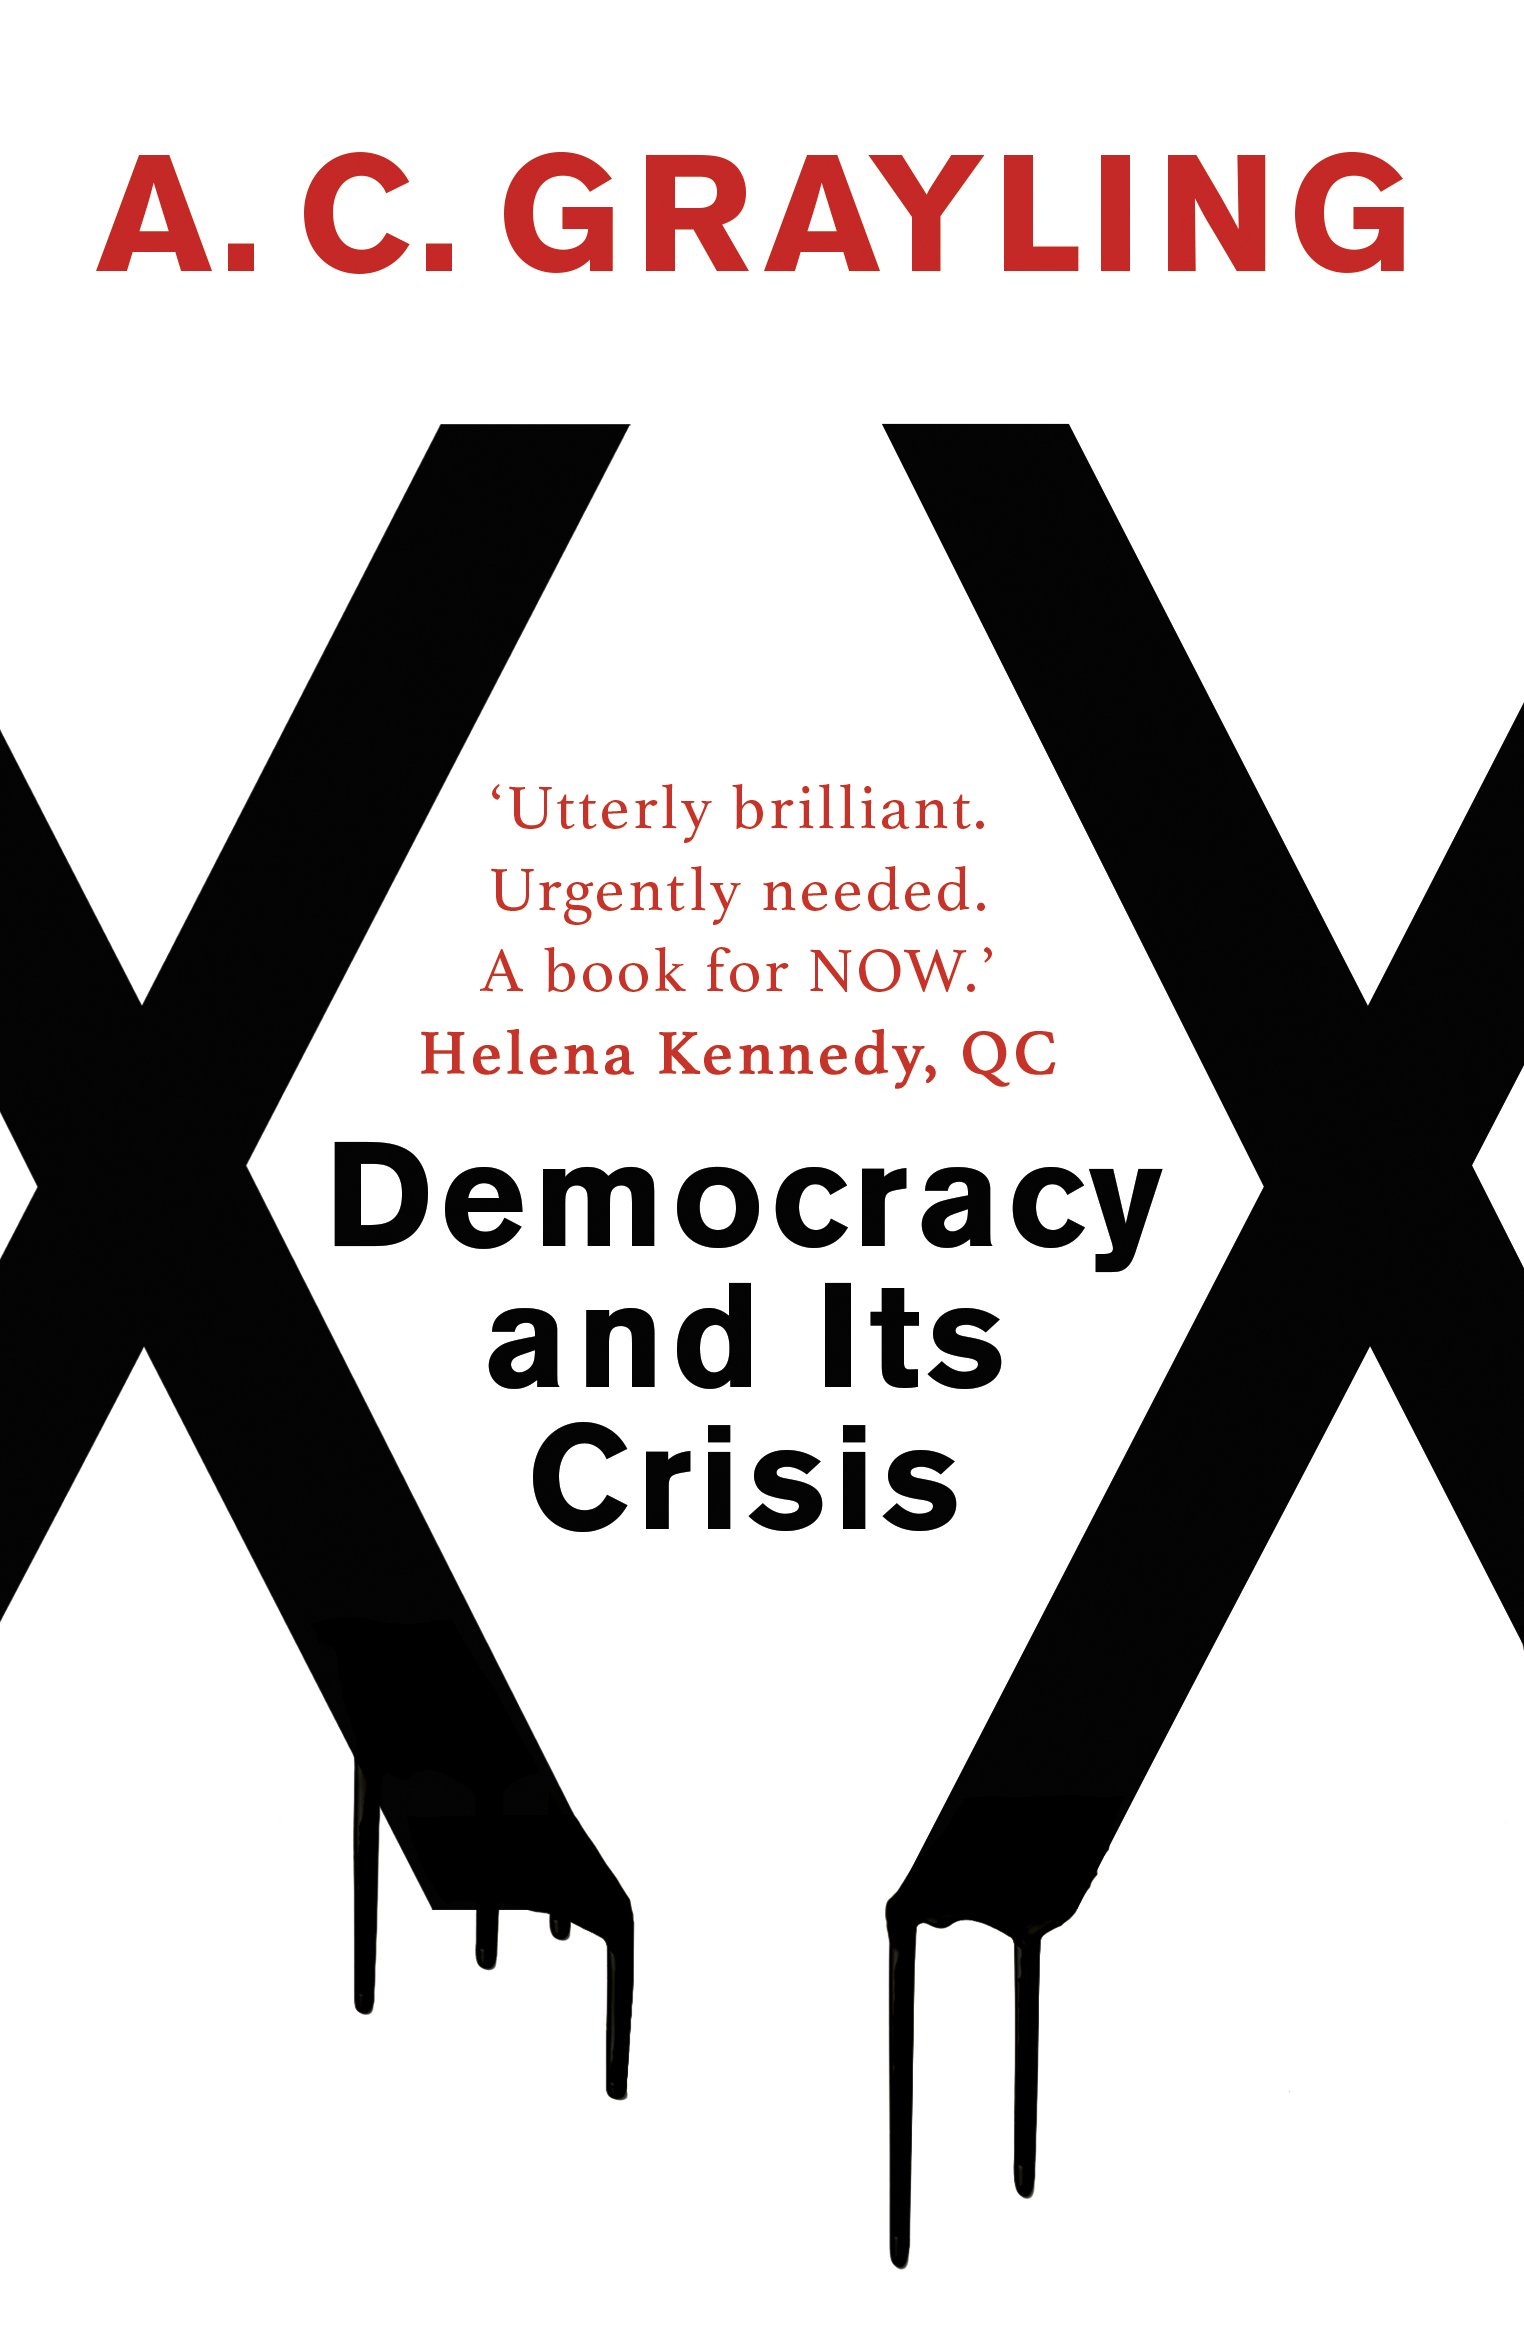 Democracy and Its Crisis | A. C. Grayling